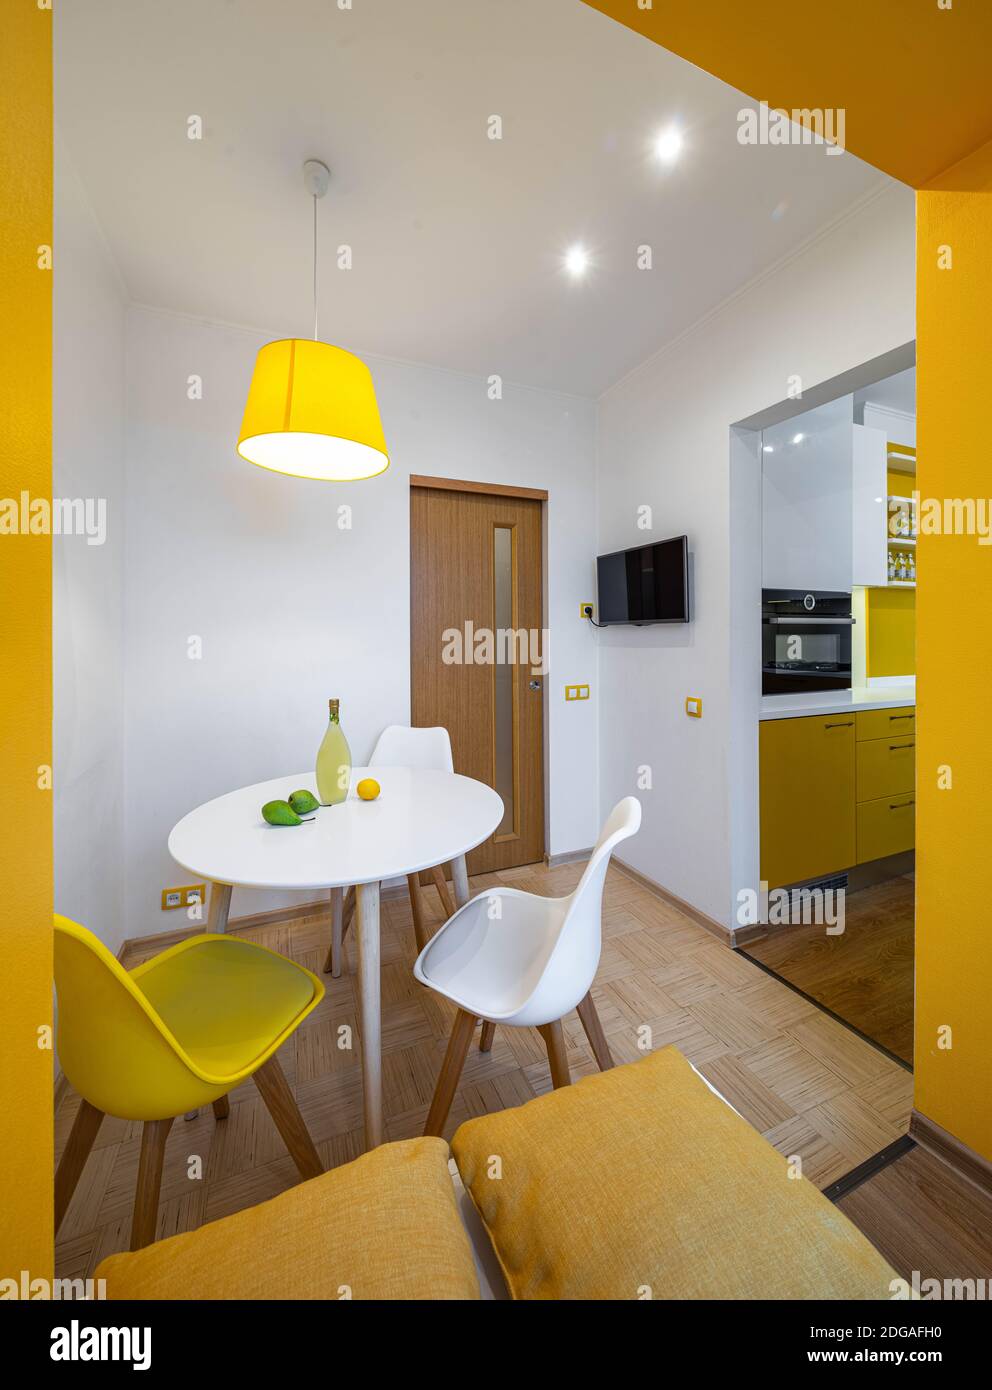 Contemporary interior of kitchen in apartment. Liquor, lemon and pears on table. TV on wall. Wooden door. Yellow and white.  Built-in oven. Stock Photo